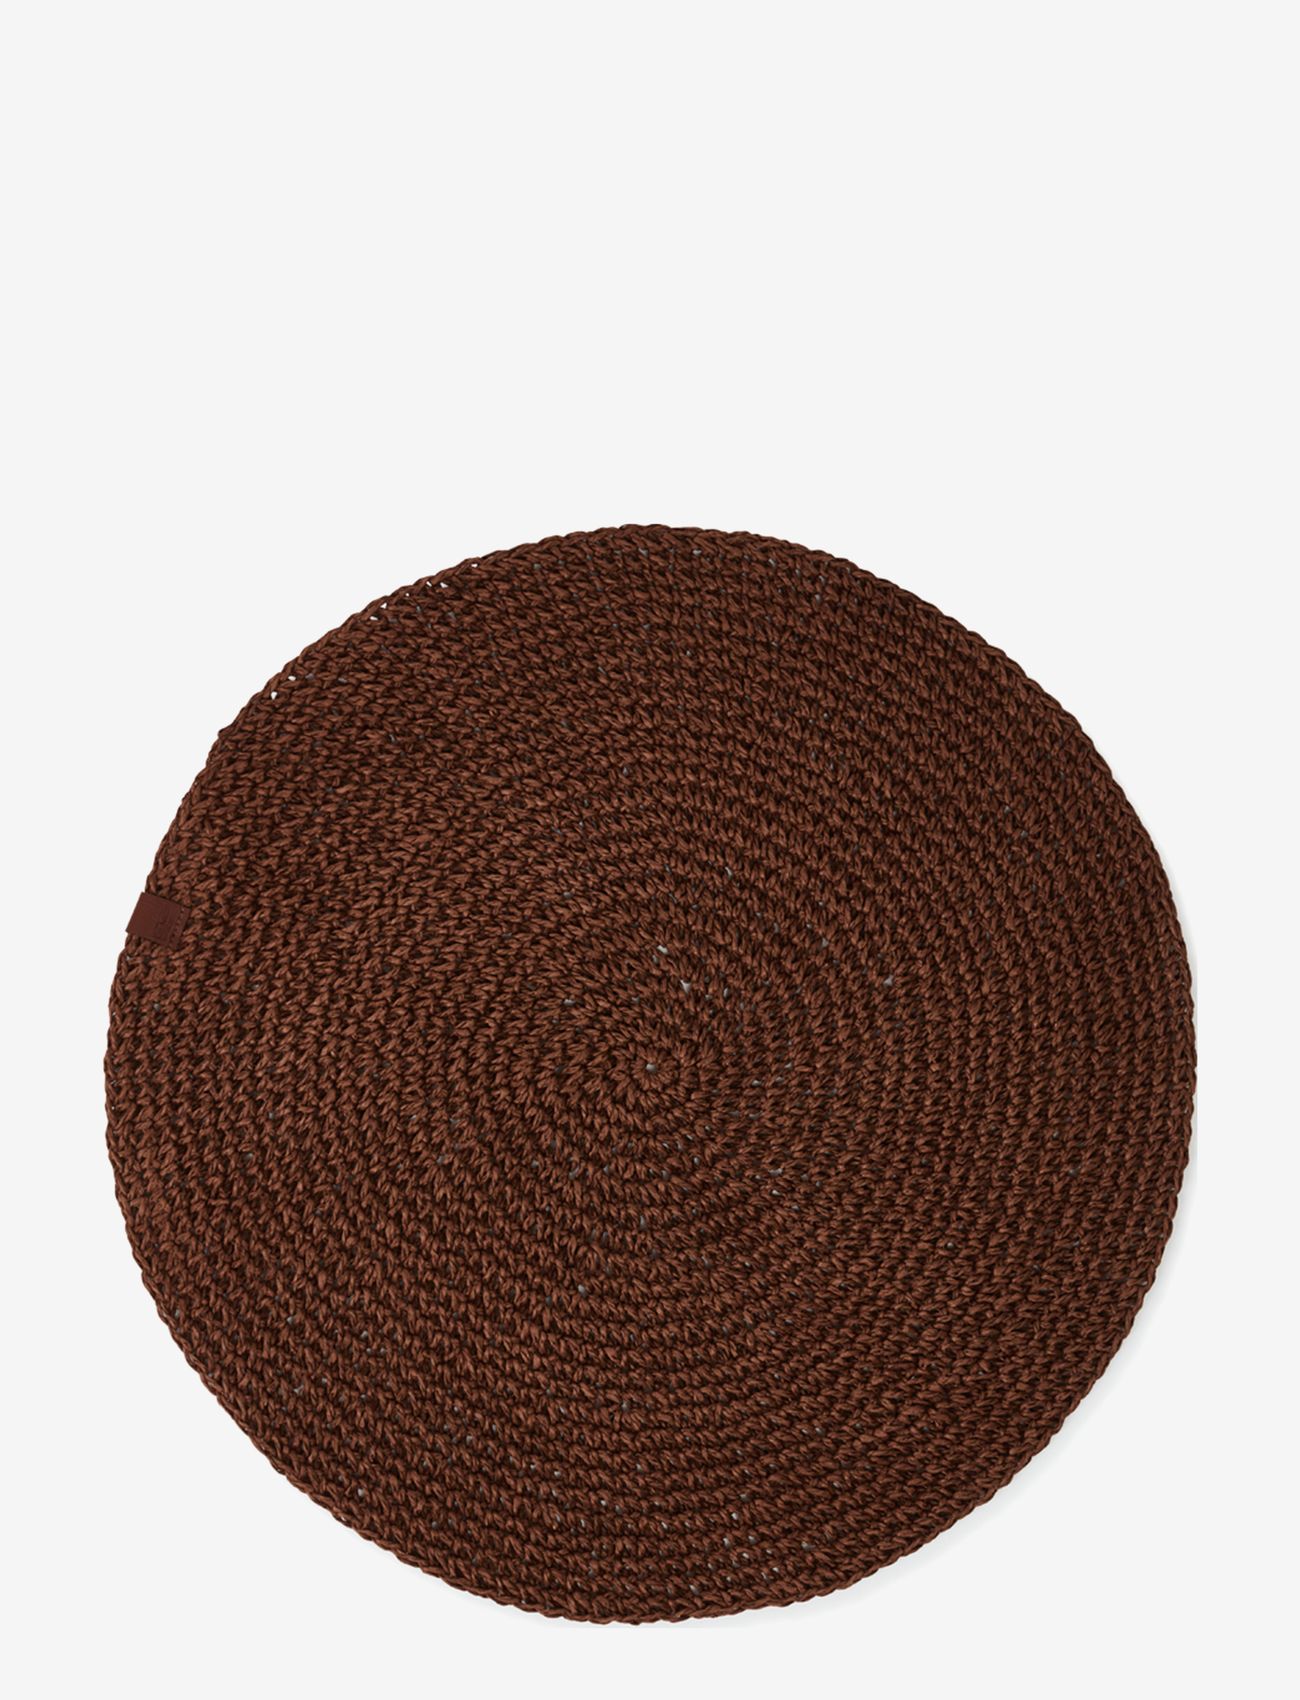 Lexington Home Round Recycled Paper, Round Straw Placemats